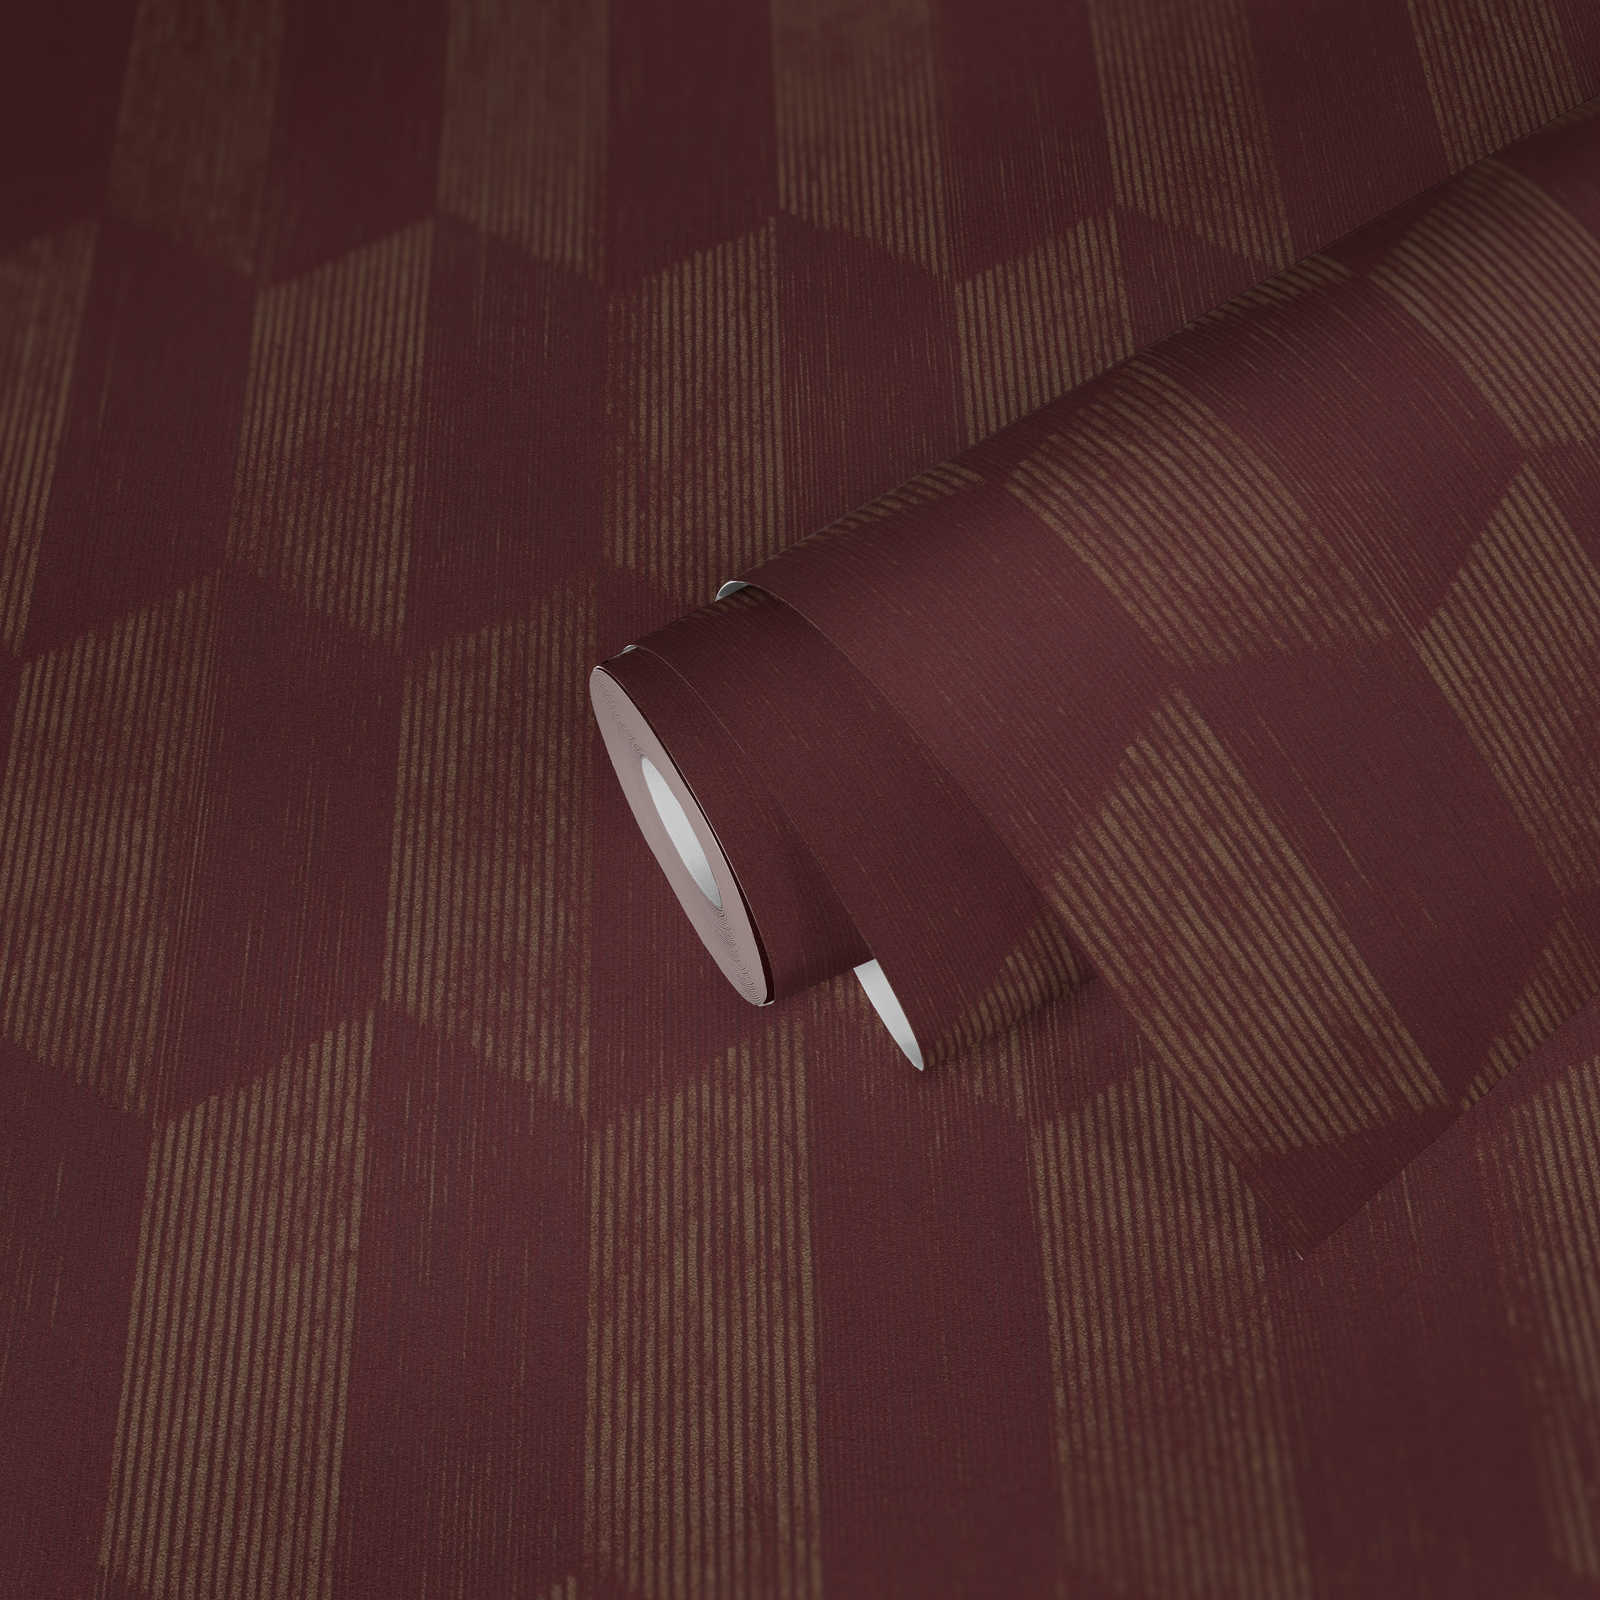             Textured wallpaper with 3D graphic pattern - metallic, red
        